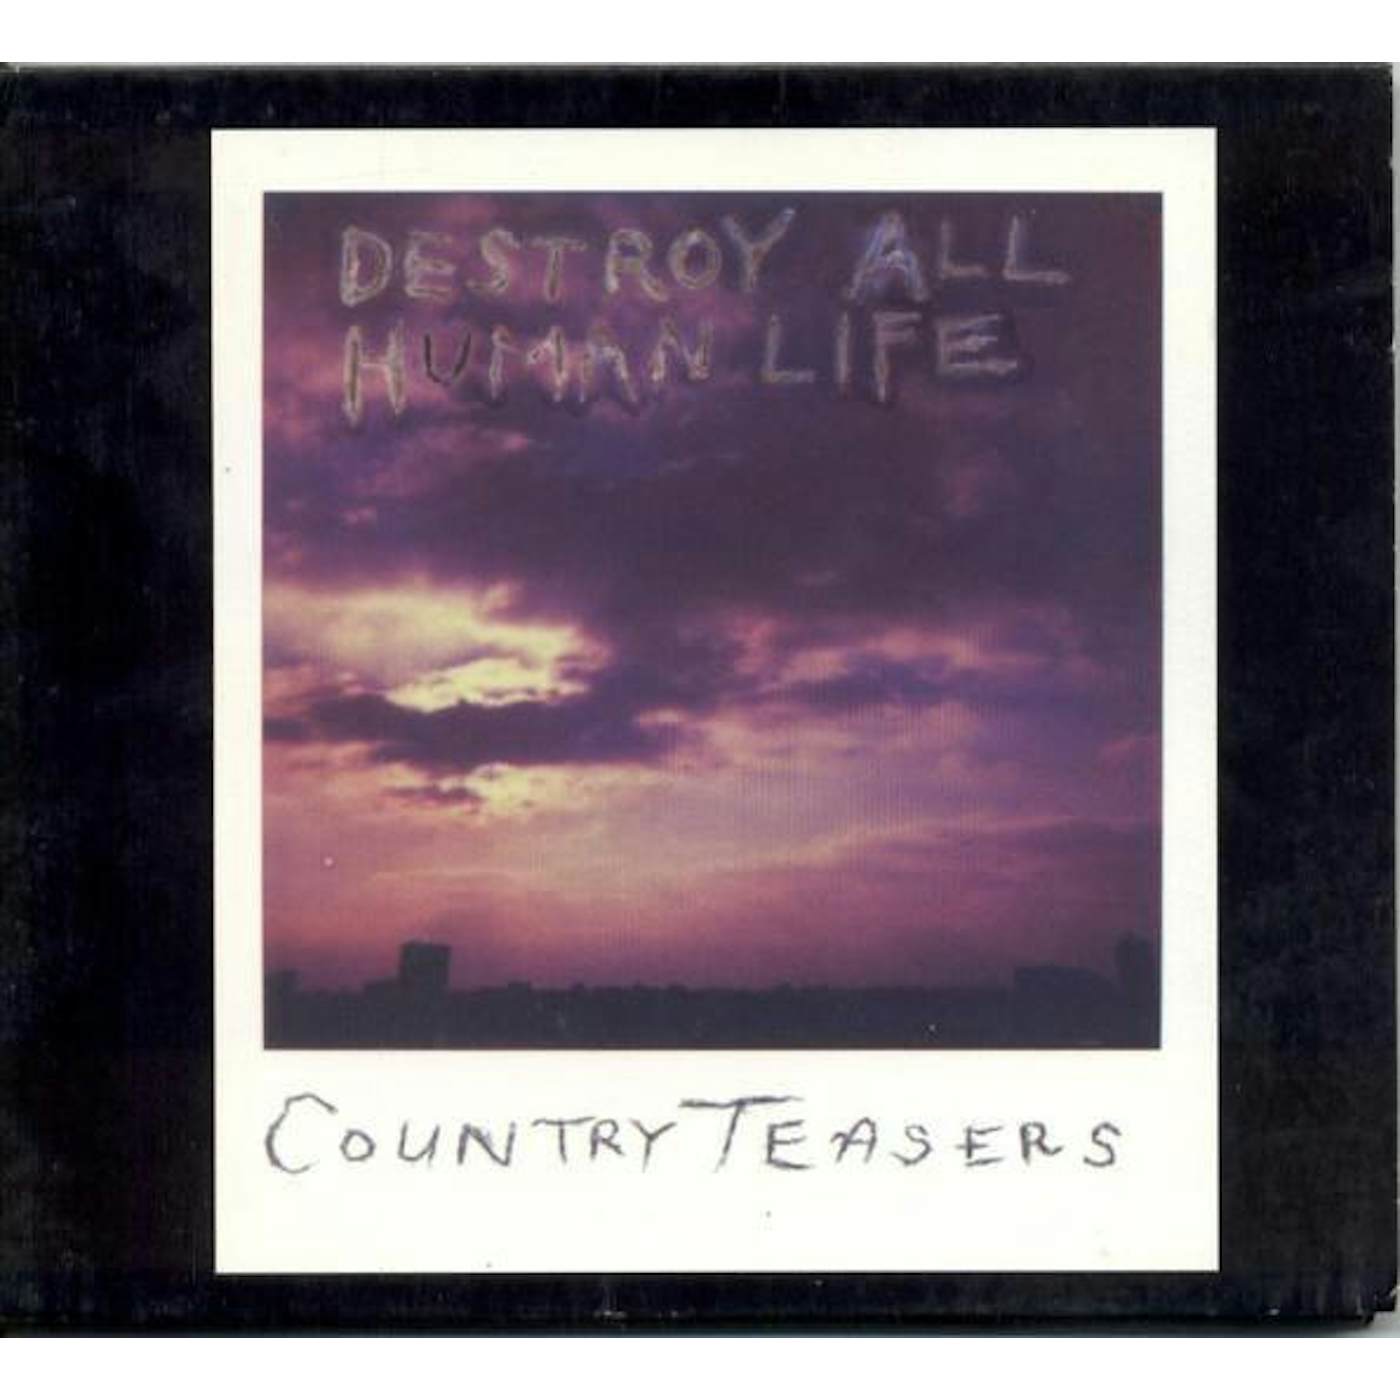 Country Teasers DESTROY ALL HUMAN LIFE CD